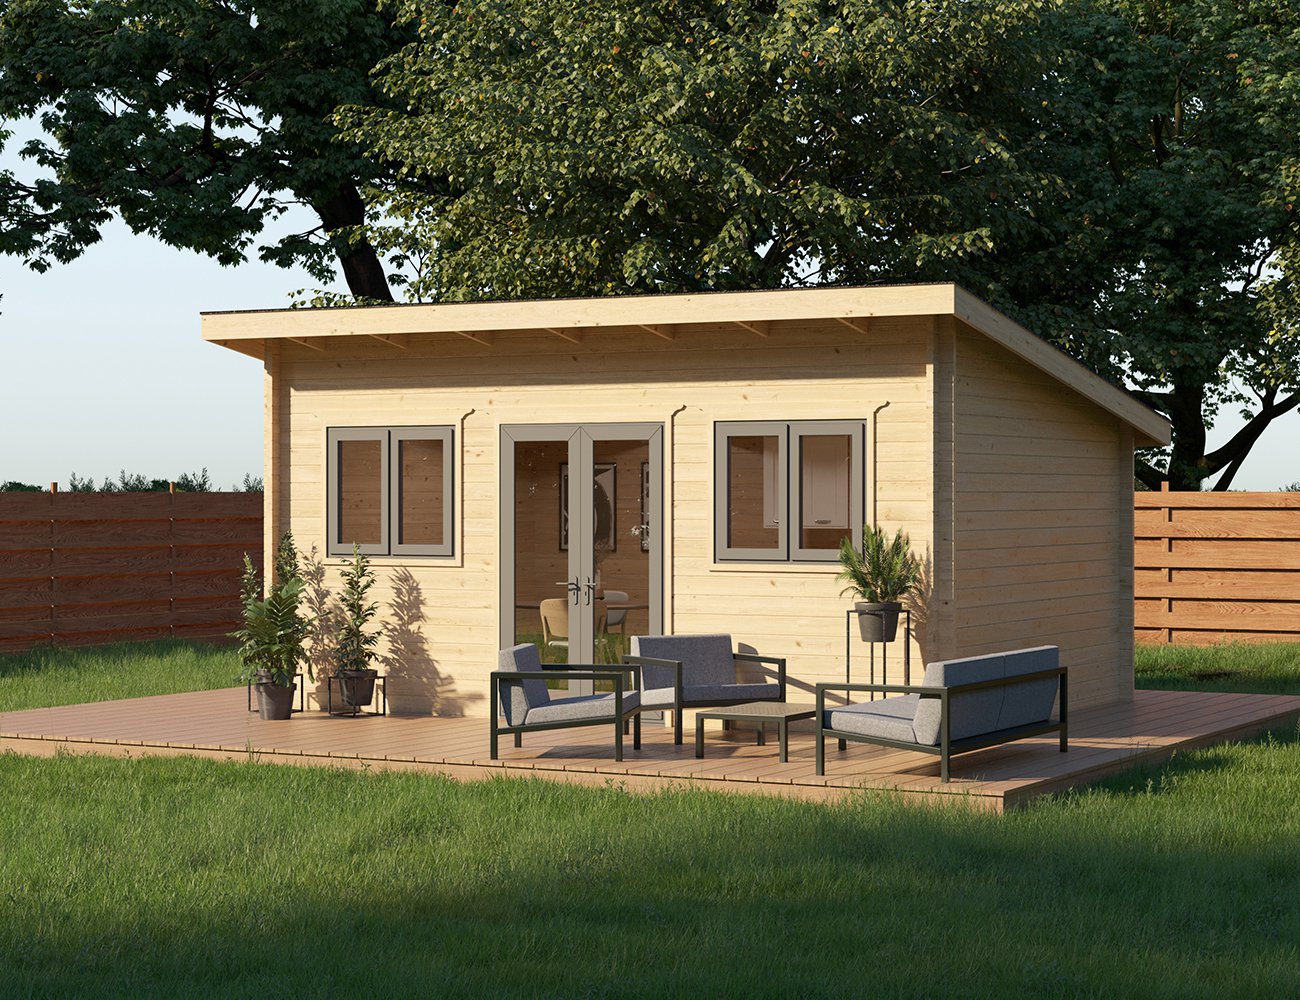 Pineview Solid Wood Cabin Garden House - 5.3x3.8m